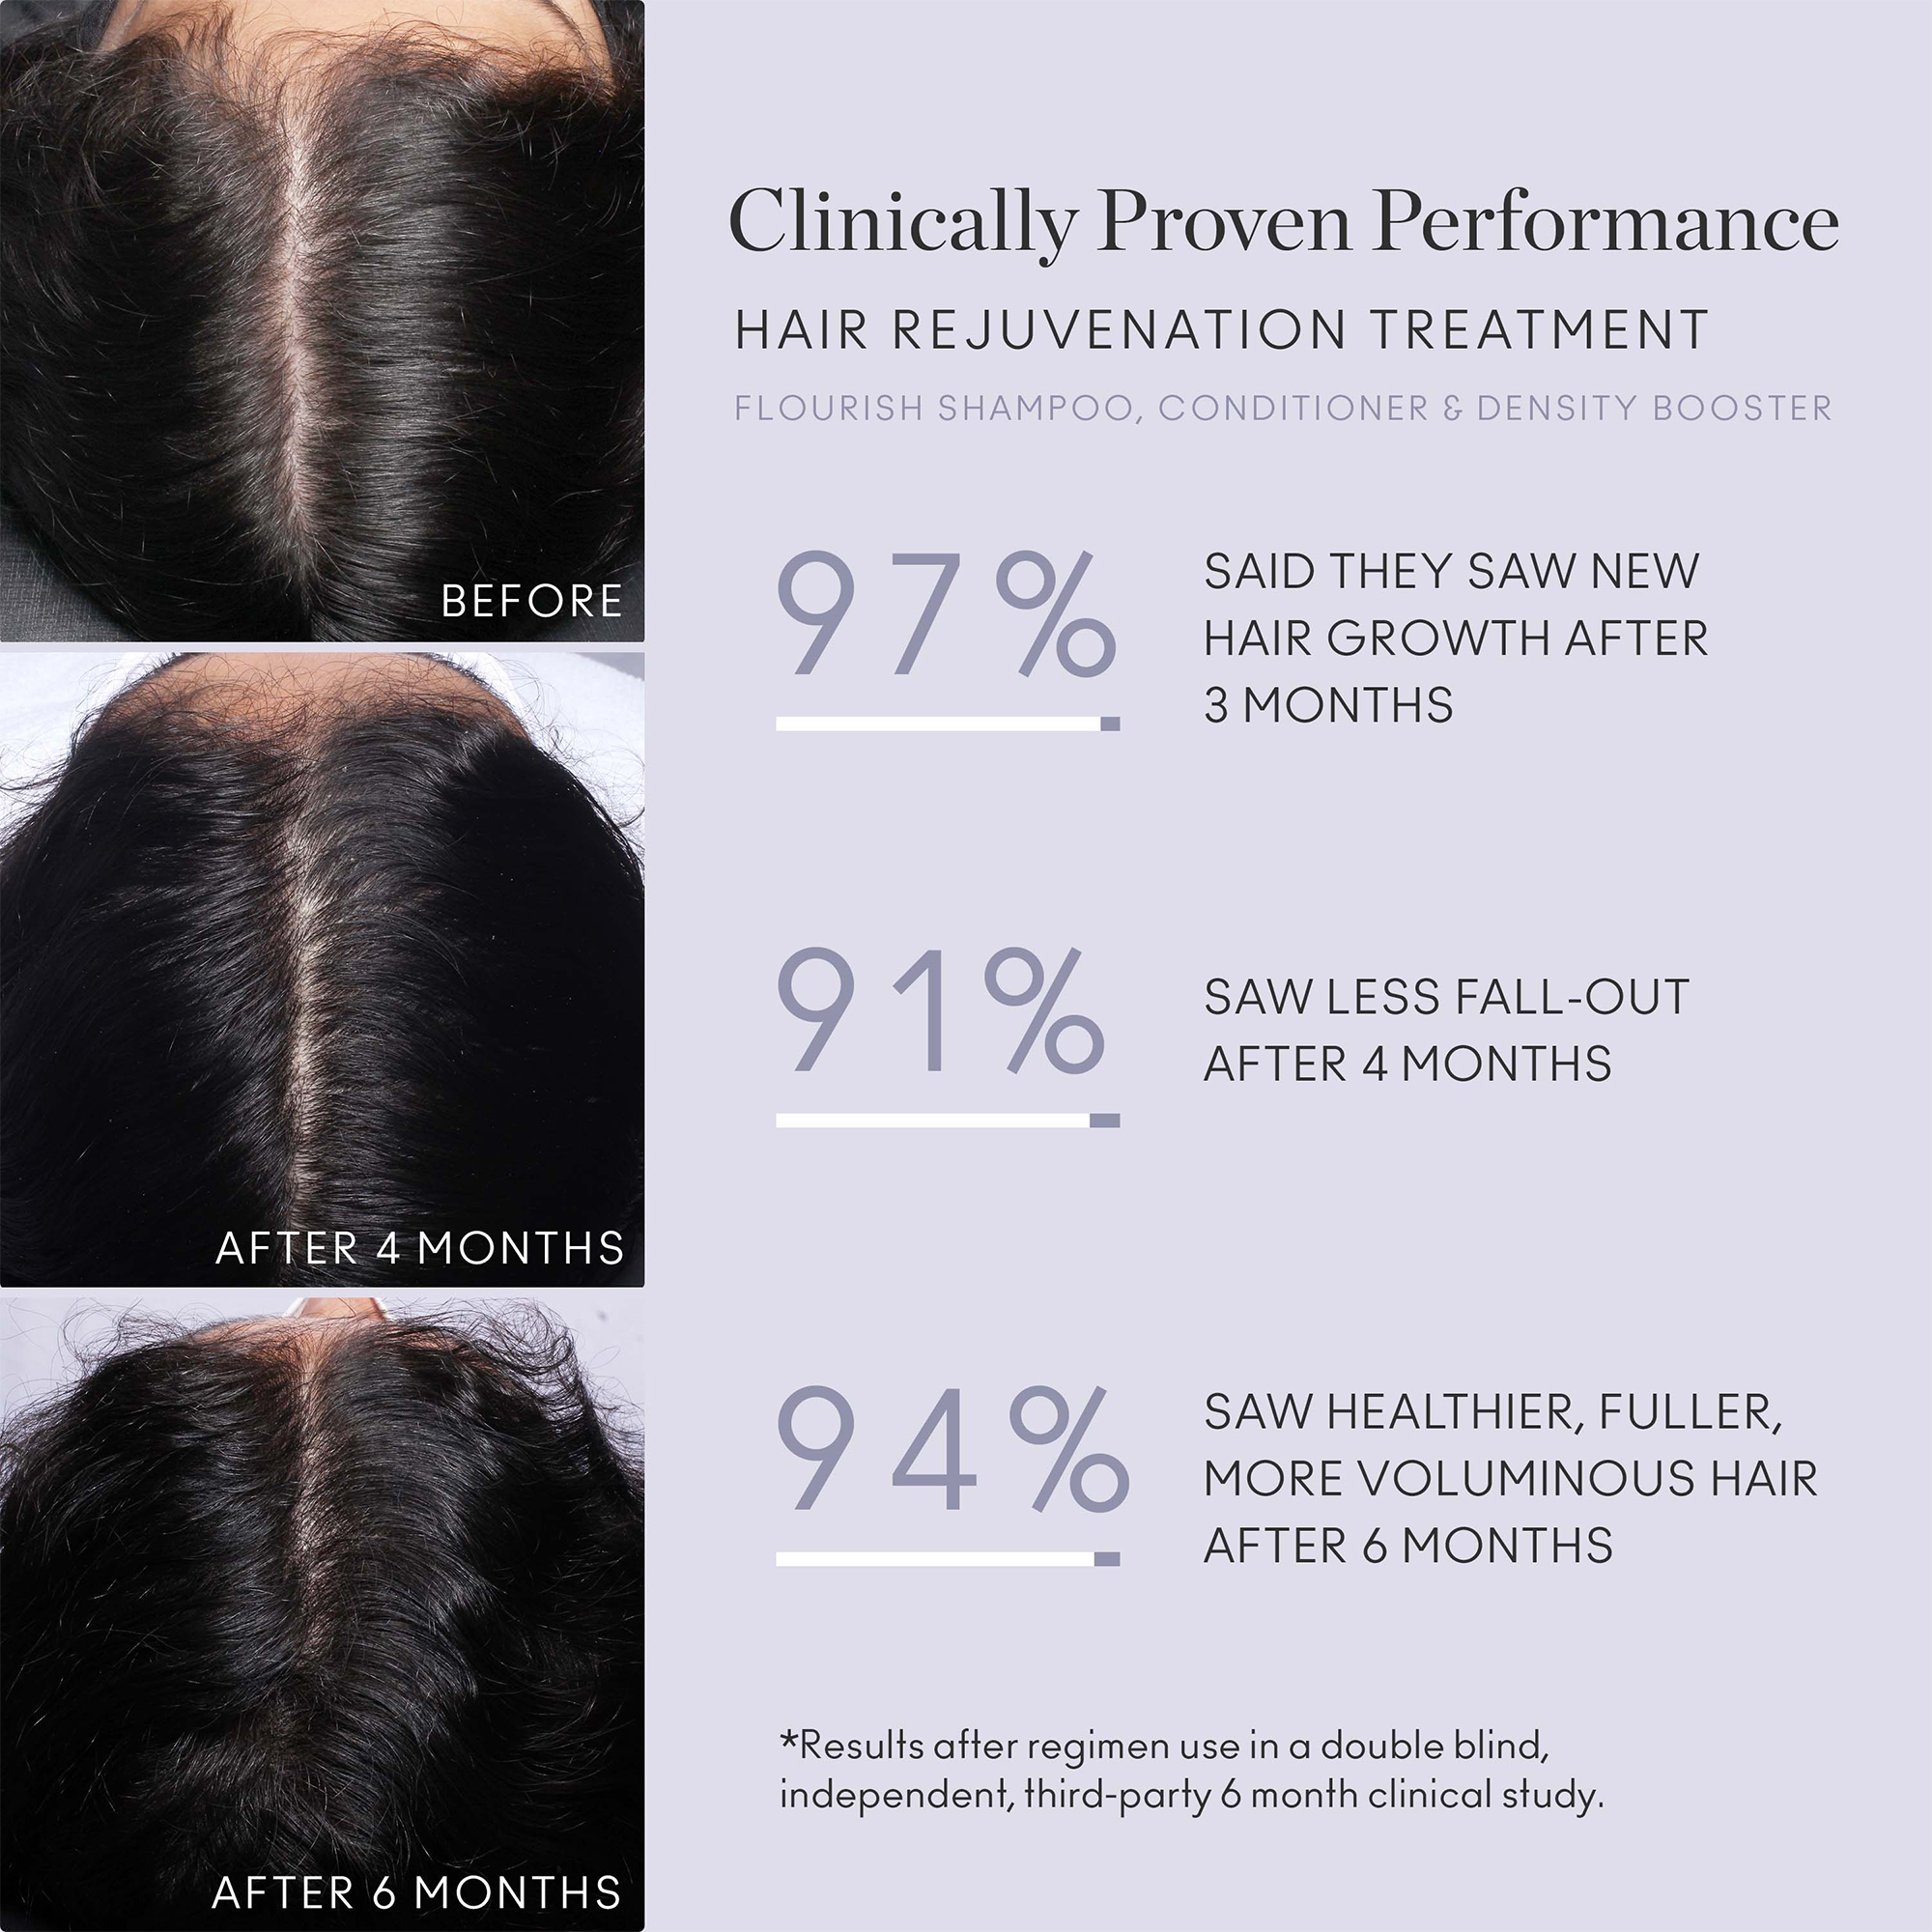 Clinically Proven Performance Hair Rejuvenation treatment Flourish shampoo, conditioner and density booster 97% said they saw new hair growth after 3 months, 91% saw less fall-out after 4 months, 94% saw healthier, fuller, more voluminous hair after 6 months - results after regimen use in a double blind independent third party 6 month clinical study